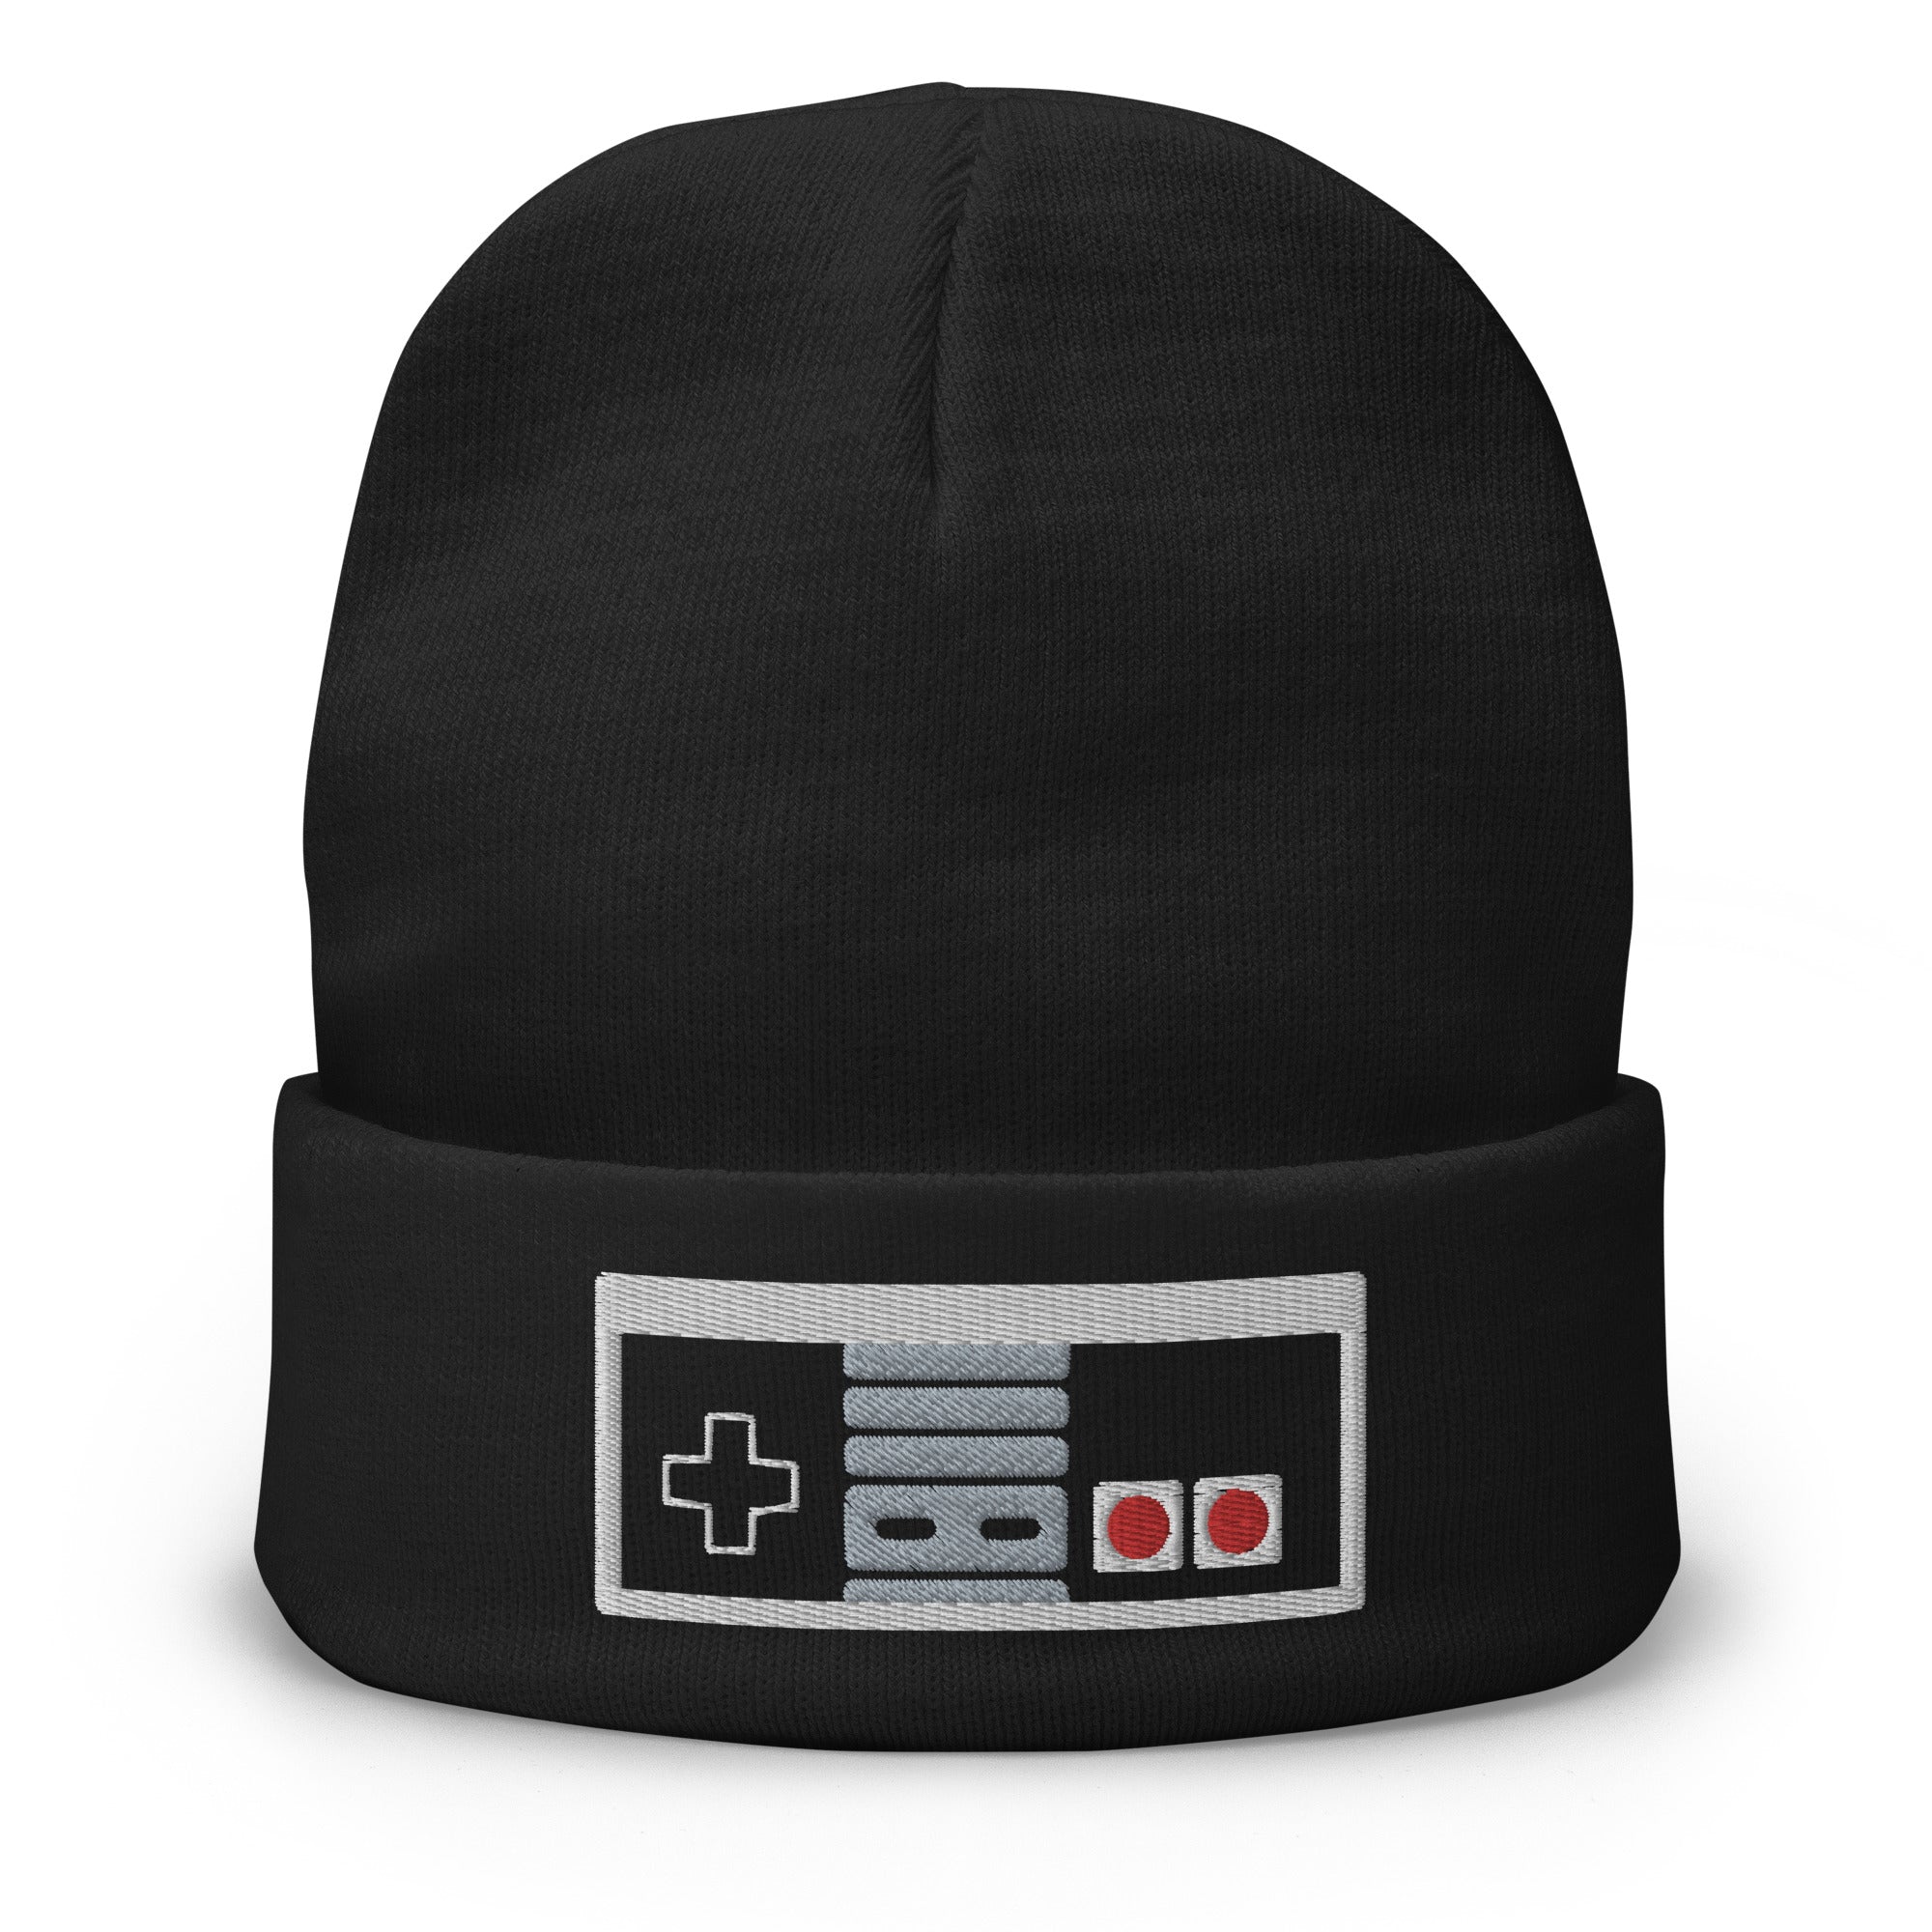 Classic NES Controller Embroidered Cuff Beanie Super Gaming - Edge of Life Designs